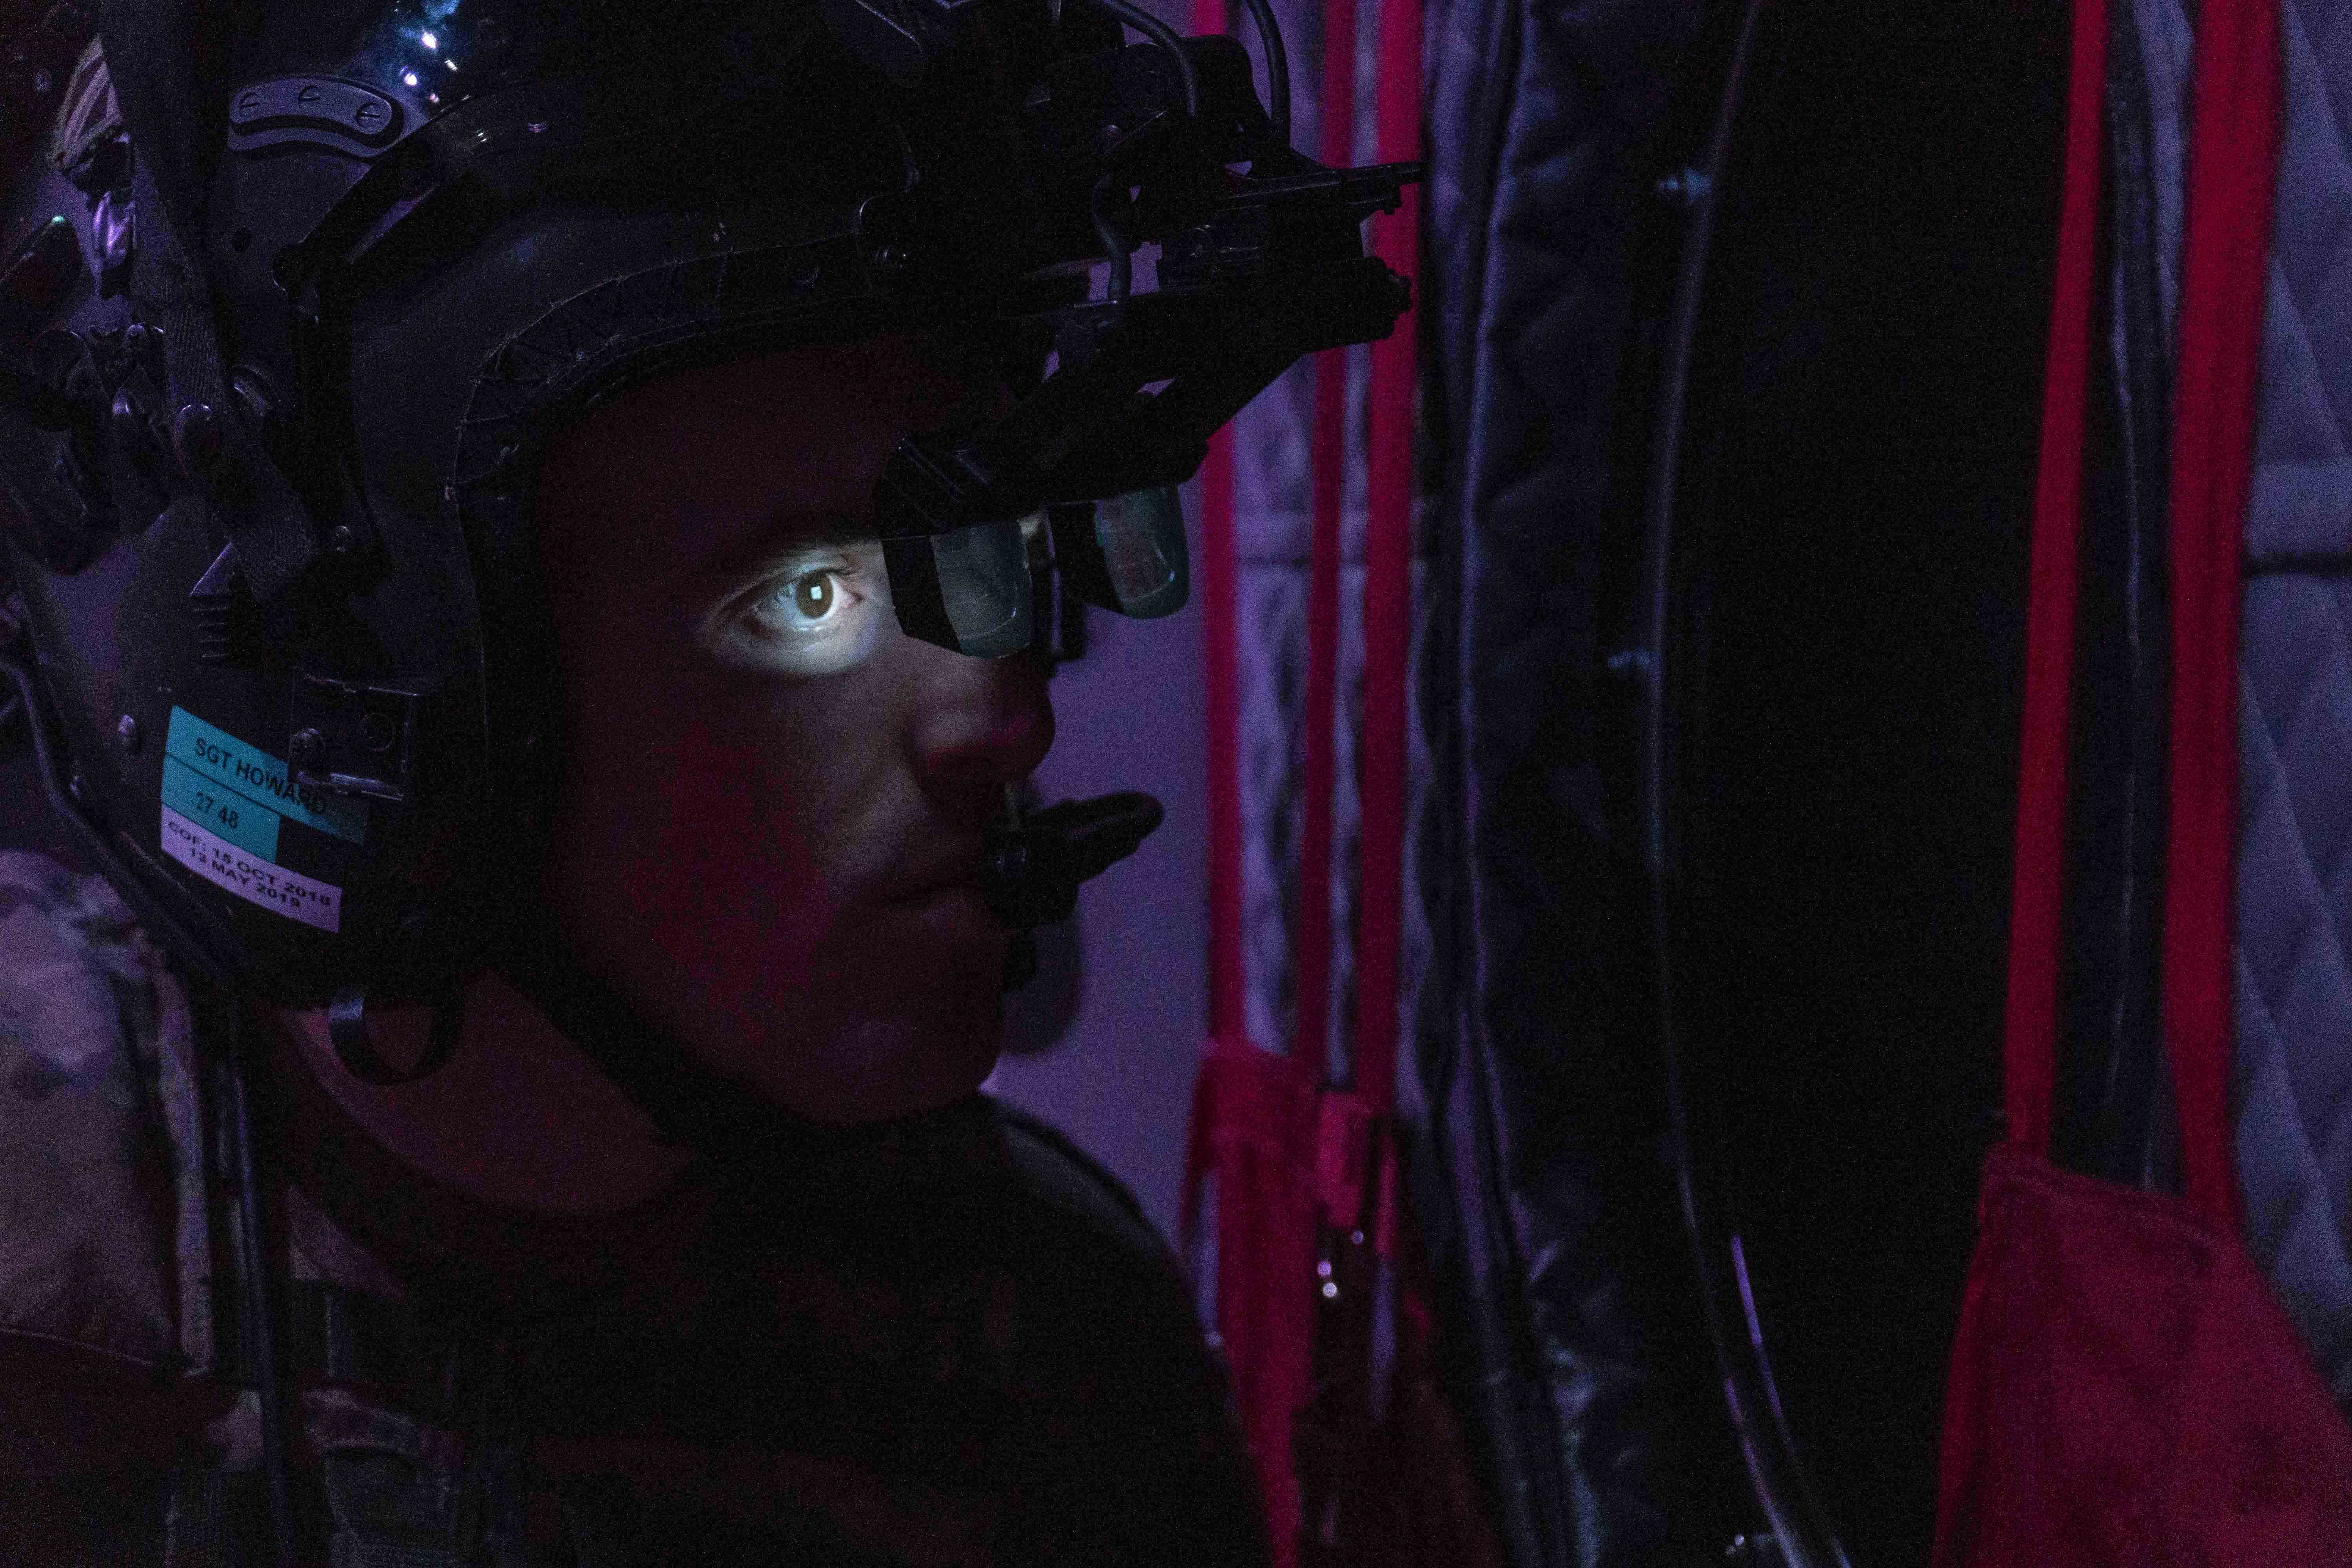 A solider's face is illuminated by the headset he wears inside a helicopter